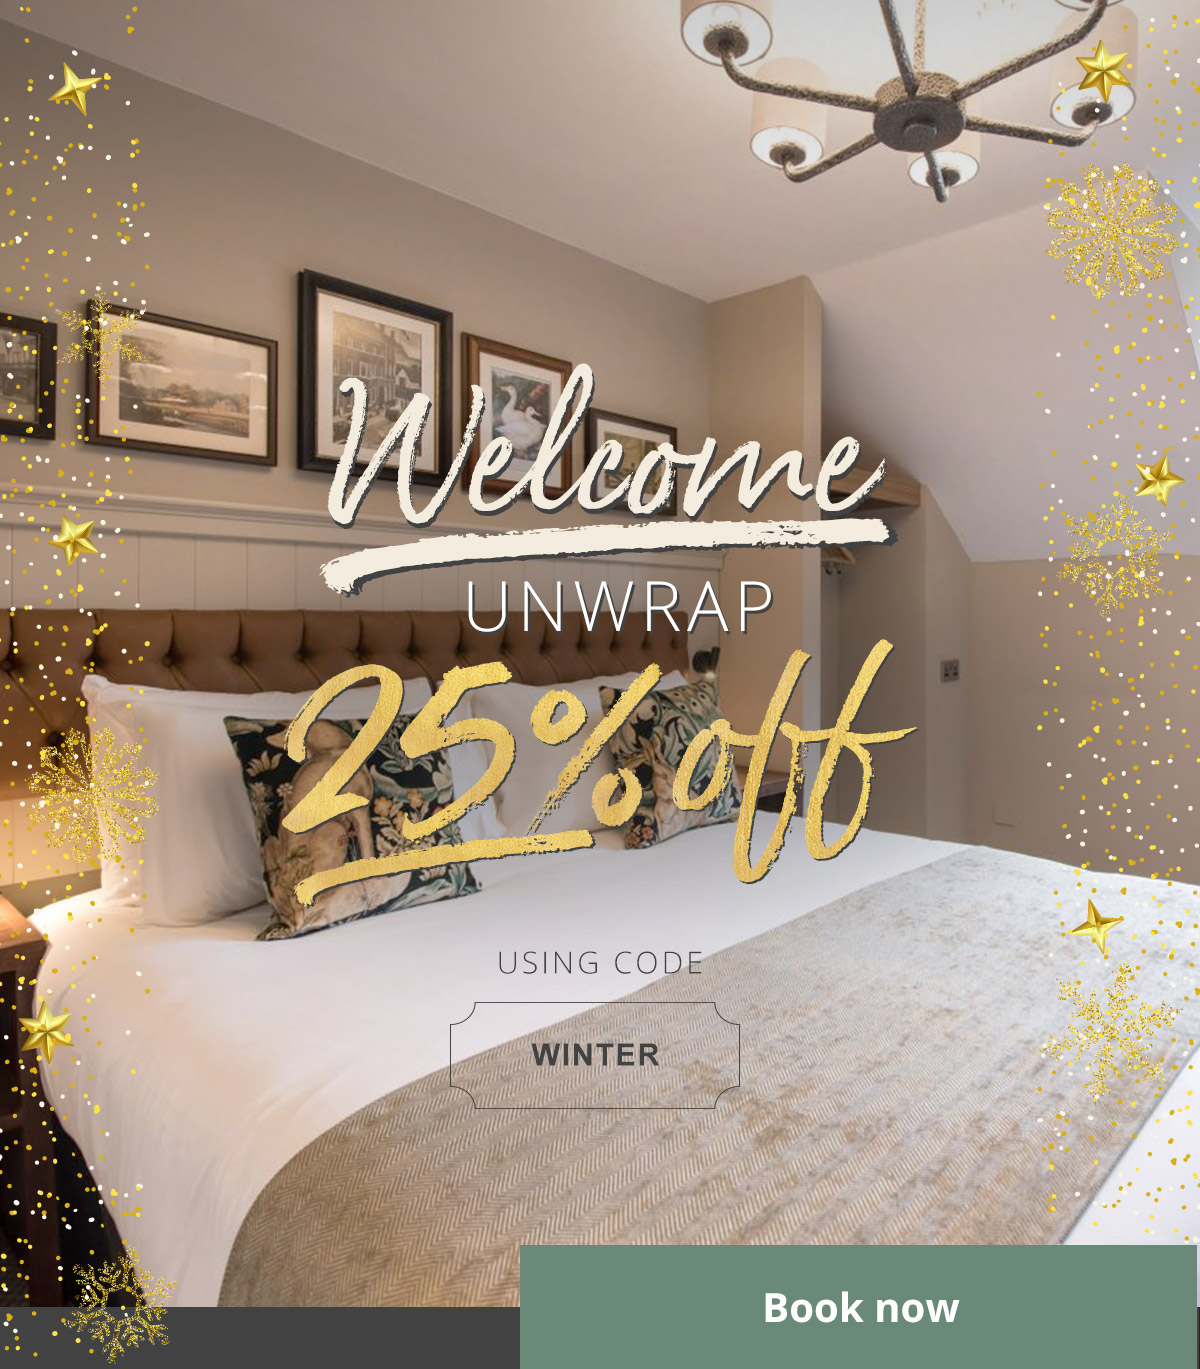 Thank you for signing up to Innkeeper’s Lodge as part of Innkeeper’s Collection. Now that you’re here, unwrap our gift of 25% off your hotel room.